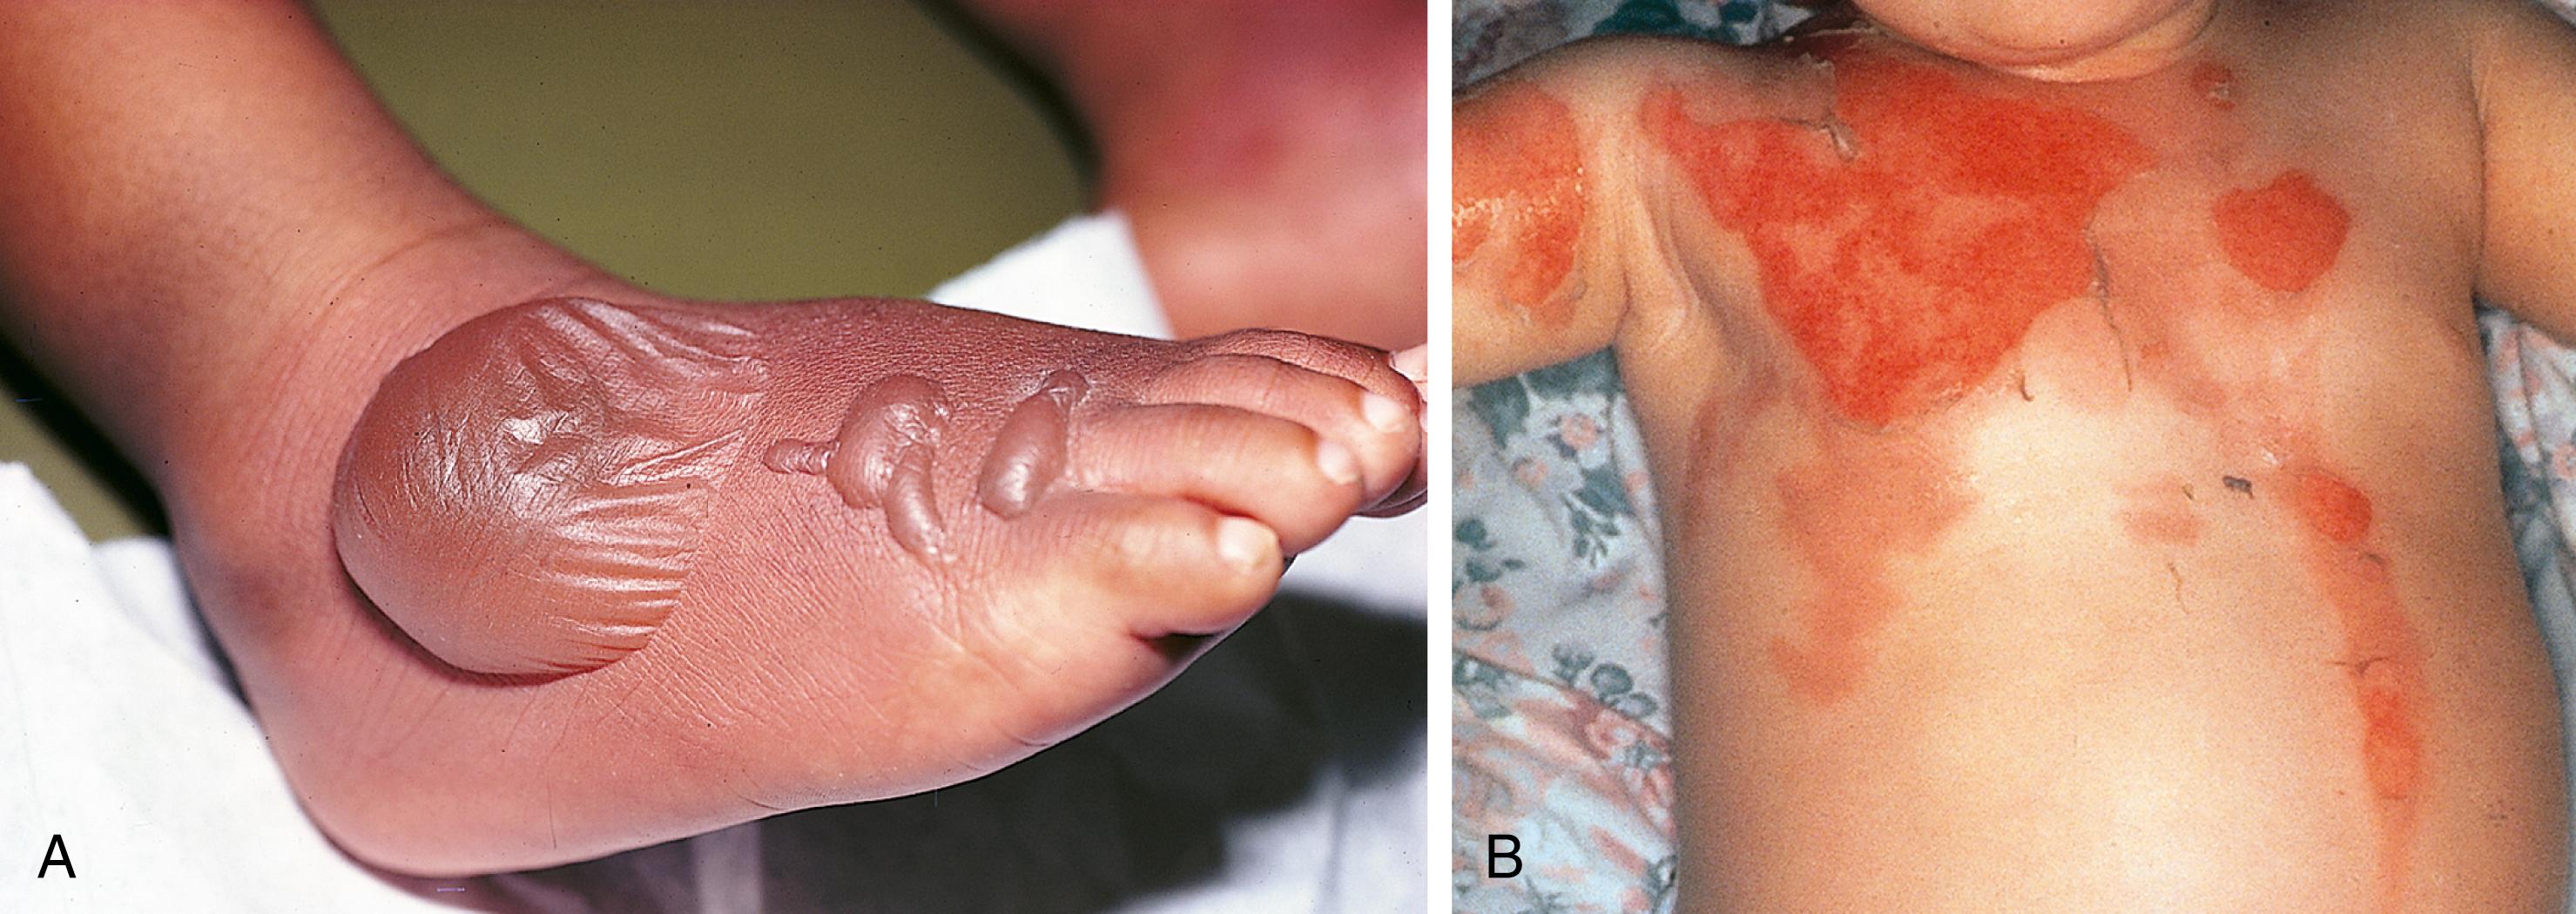 Fig. 6.16, Accidental scalds. (A) The splash-and-droplet pattern of an accidental scald is evident on the foot of a toddler who grabbed a hot cup of tea from the table while sitting on his grandmother’s lap. (B) This toddler grabbed a pot handle projecting out over the edge of a stove, spilling hot soup over her chest and shoulder. Cooling of the hot liquid as it flowed downward produced the inverted arrowhead pattern, the burn being wider and of greater depth proximally and narrowing and becoming more superficial distally. There is also a descending droplet and splash pattern to the left of the midline.